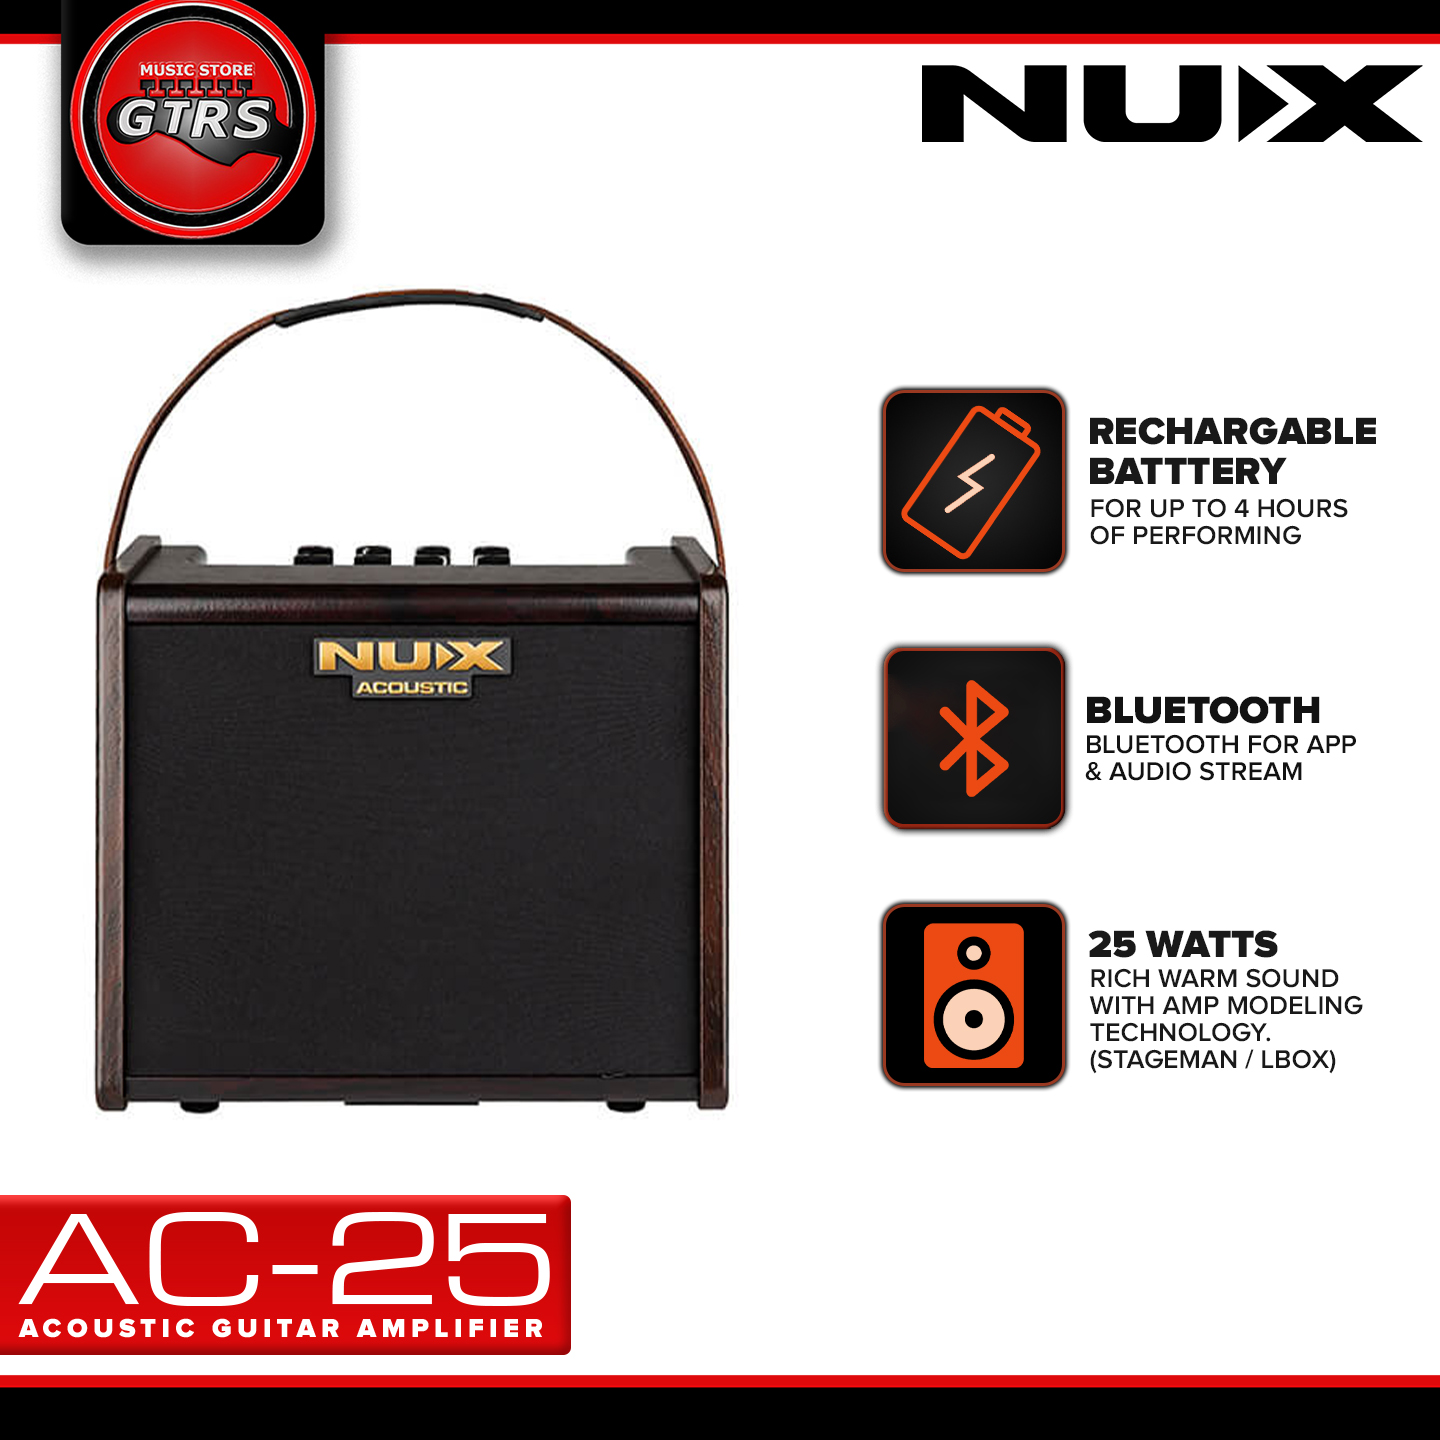 NUX AC-25 Portable Battery-Operated Acoustic Guitar Amplifier